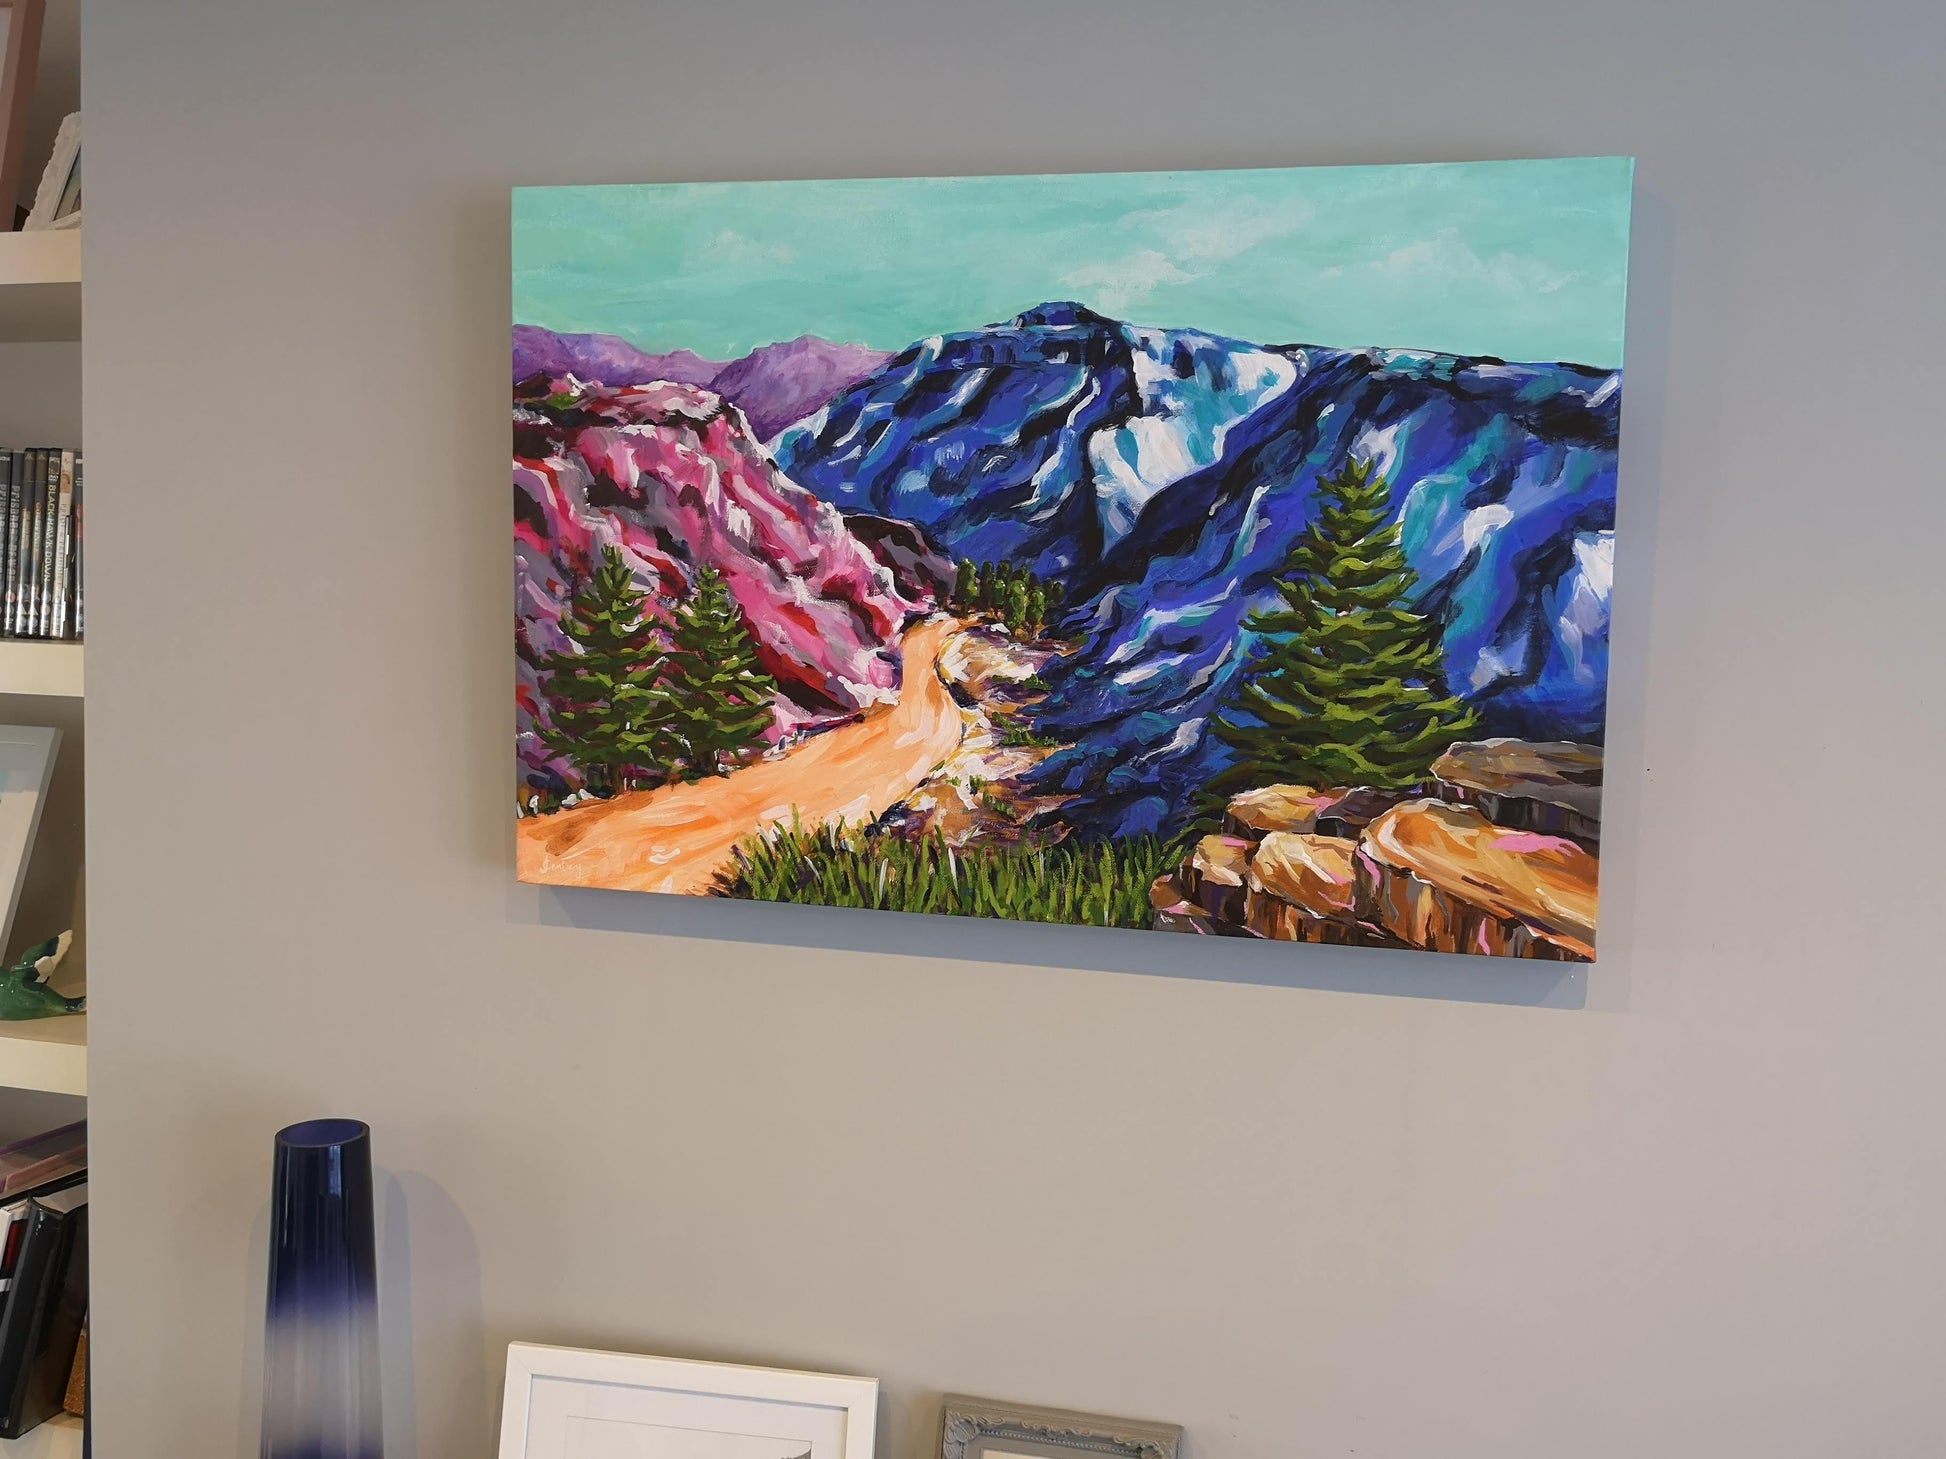 In situ picture of Vibrant, colourful Abstract Landscape painting by Judy Century. Mountain adventure acrylic canvas wall art on grey wall above fireplace.